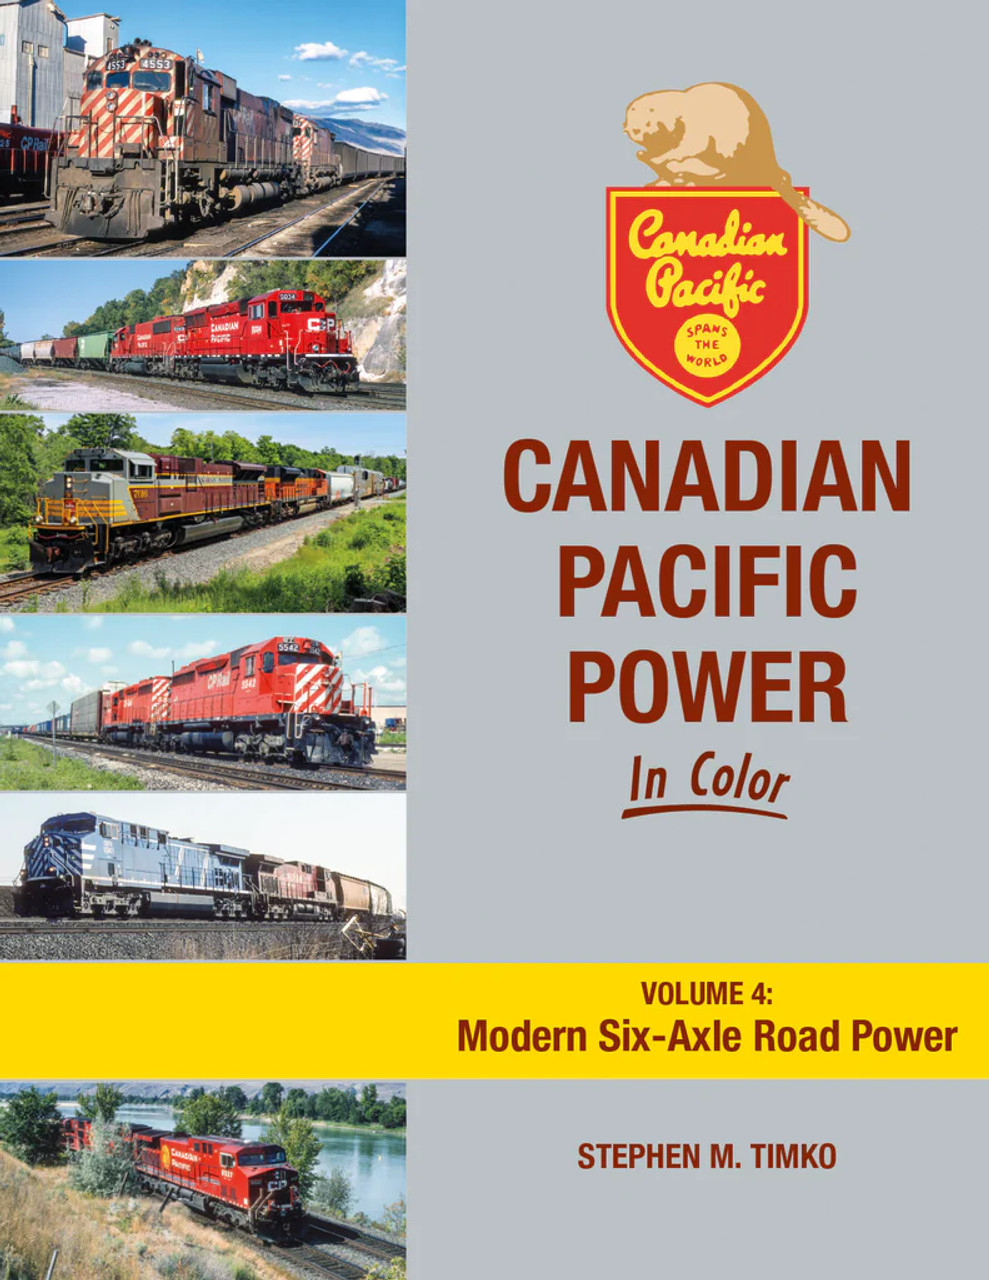 Morning Sun 1766 Canadian Pacific Power In Color Volume 4: Modern Six-Axle Road Power